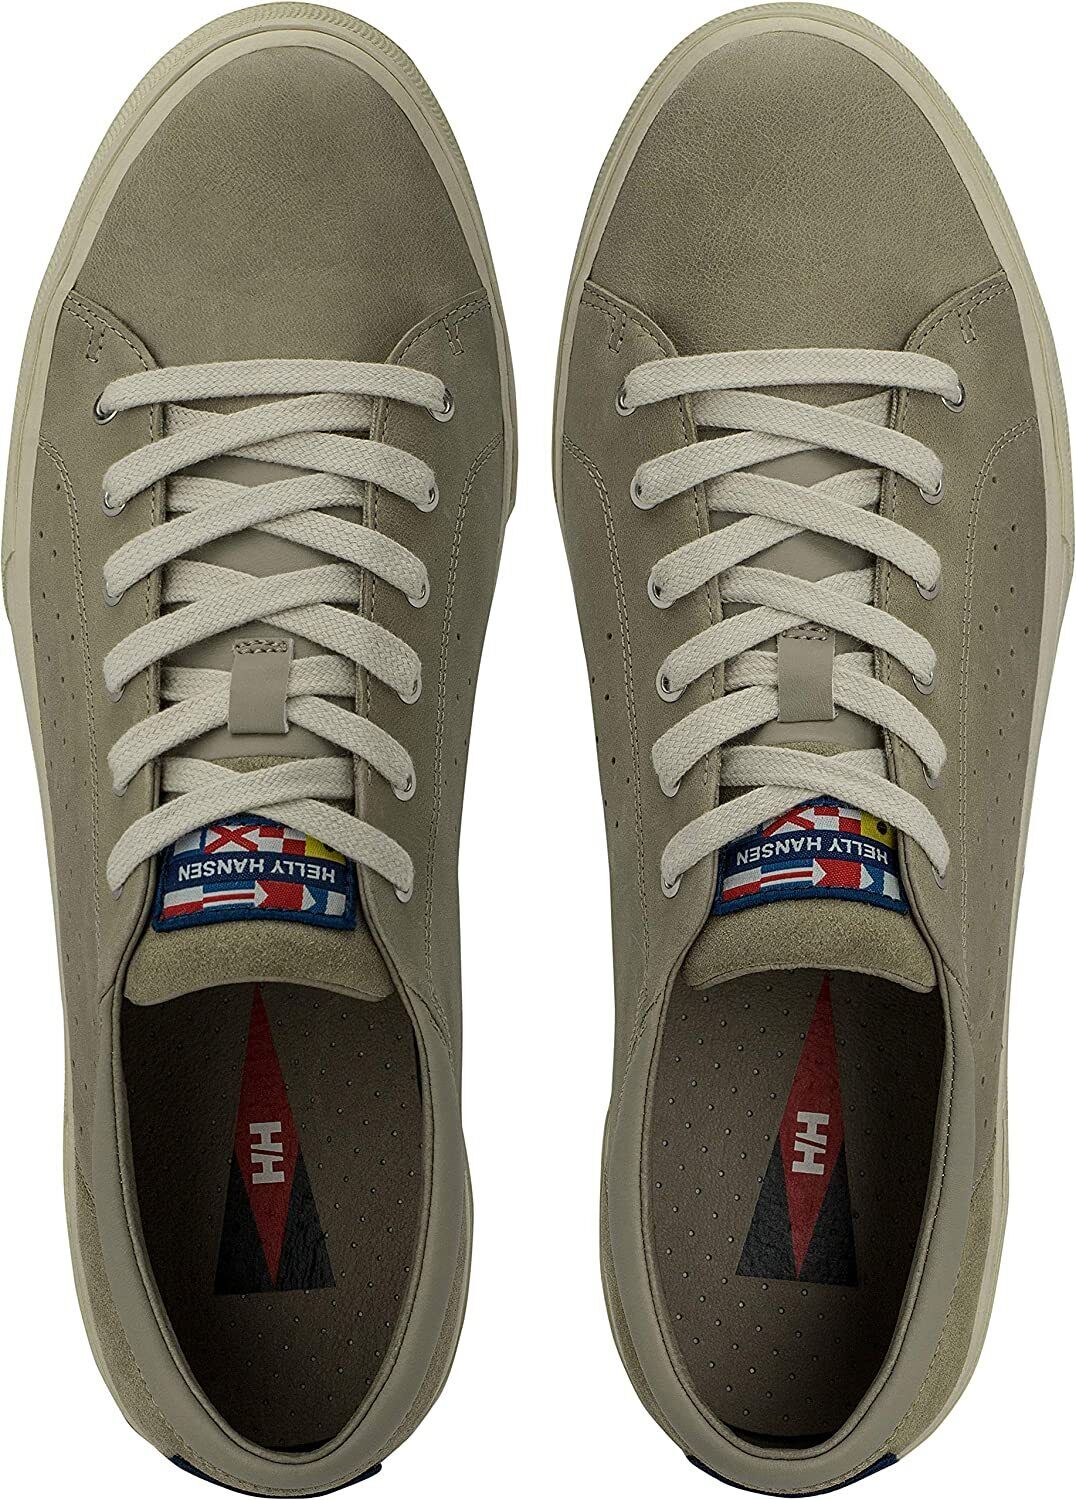 Mens Helly Hansen Copenhagen 11502 718 Grey Leather Lace Up Low Shoes - London Top Style